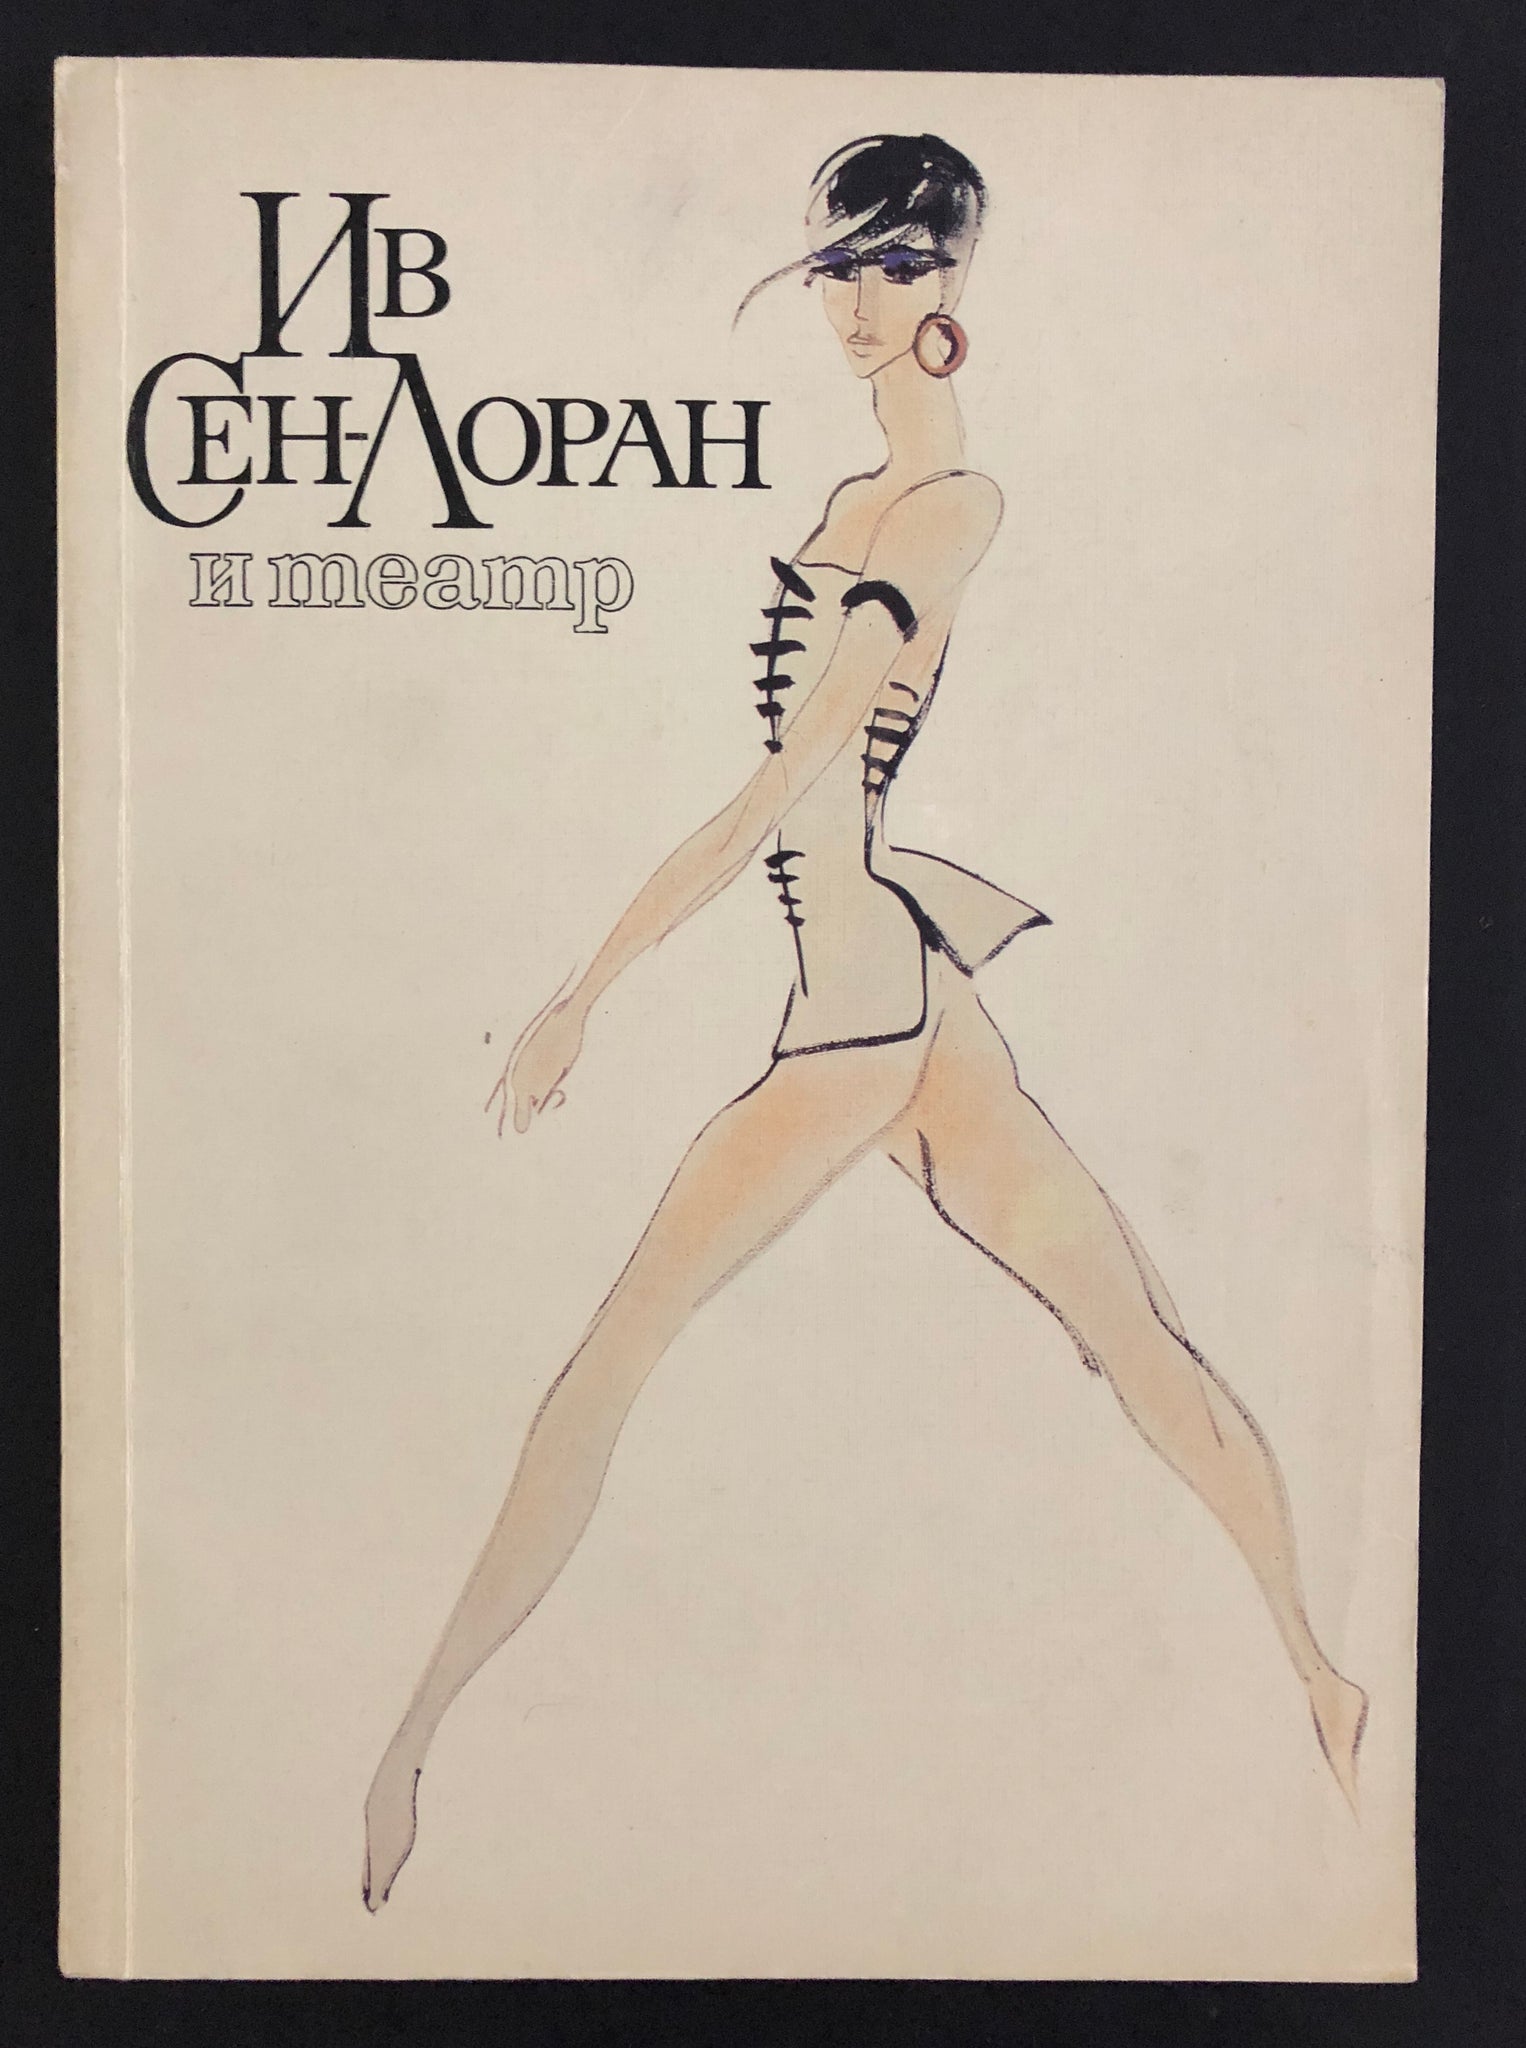 Yves Saint Laurent and the theatre [Russian Edition] – SIGNED